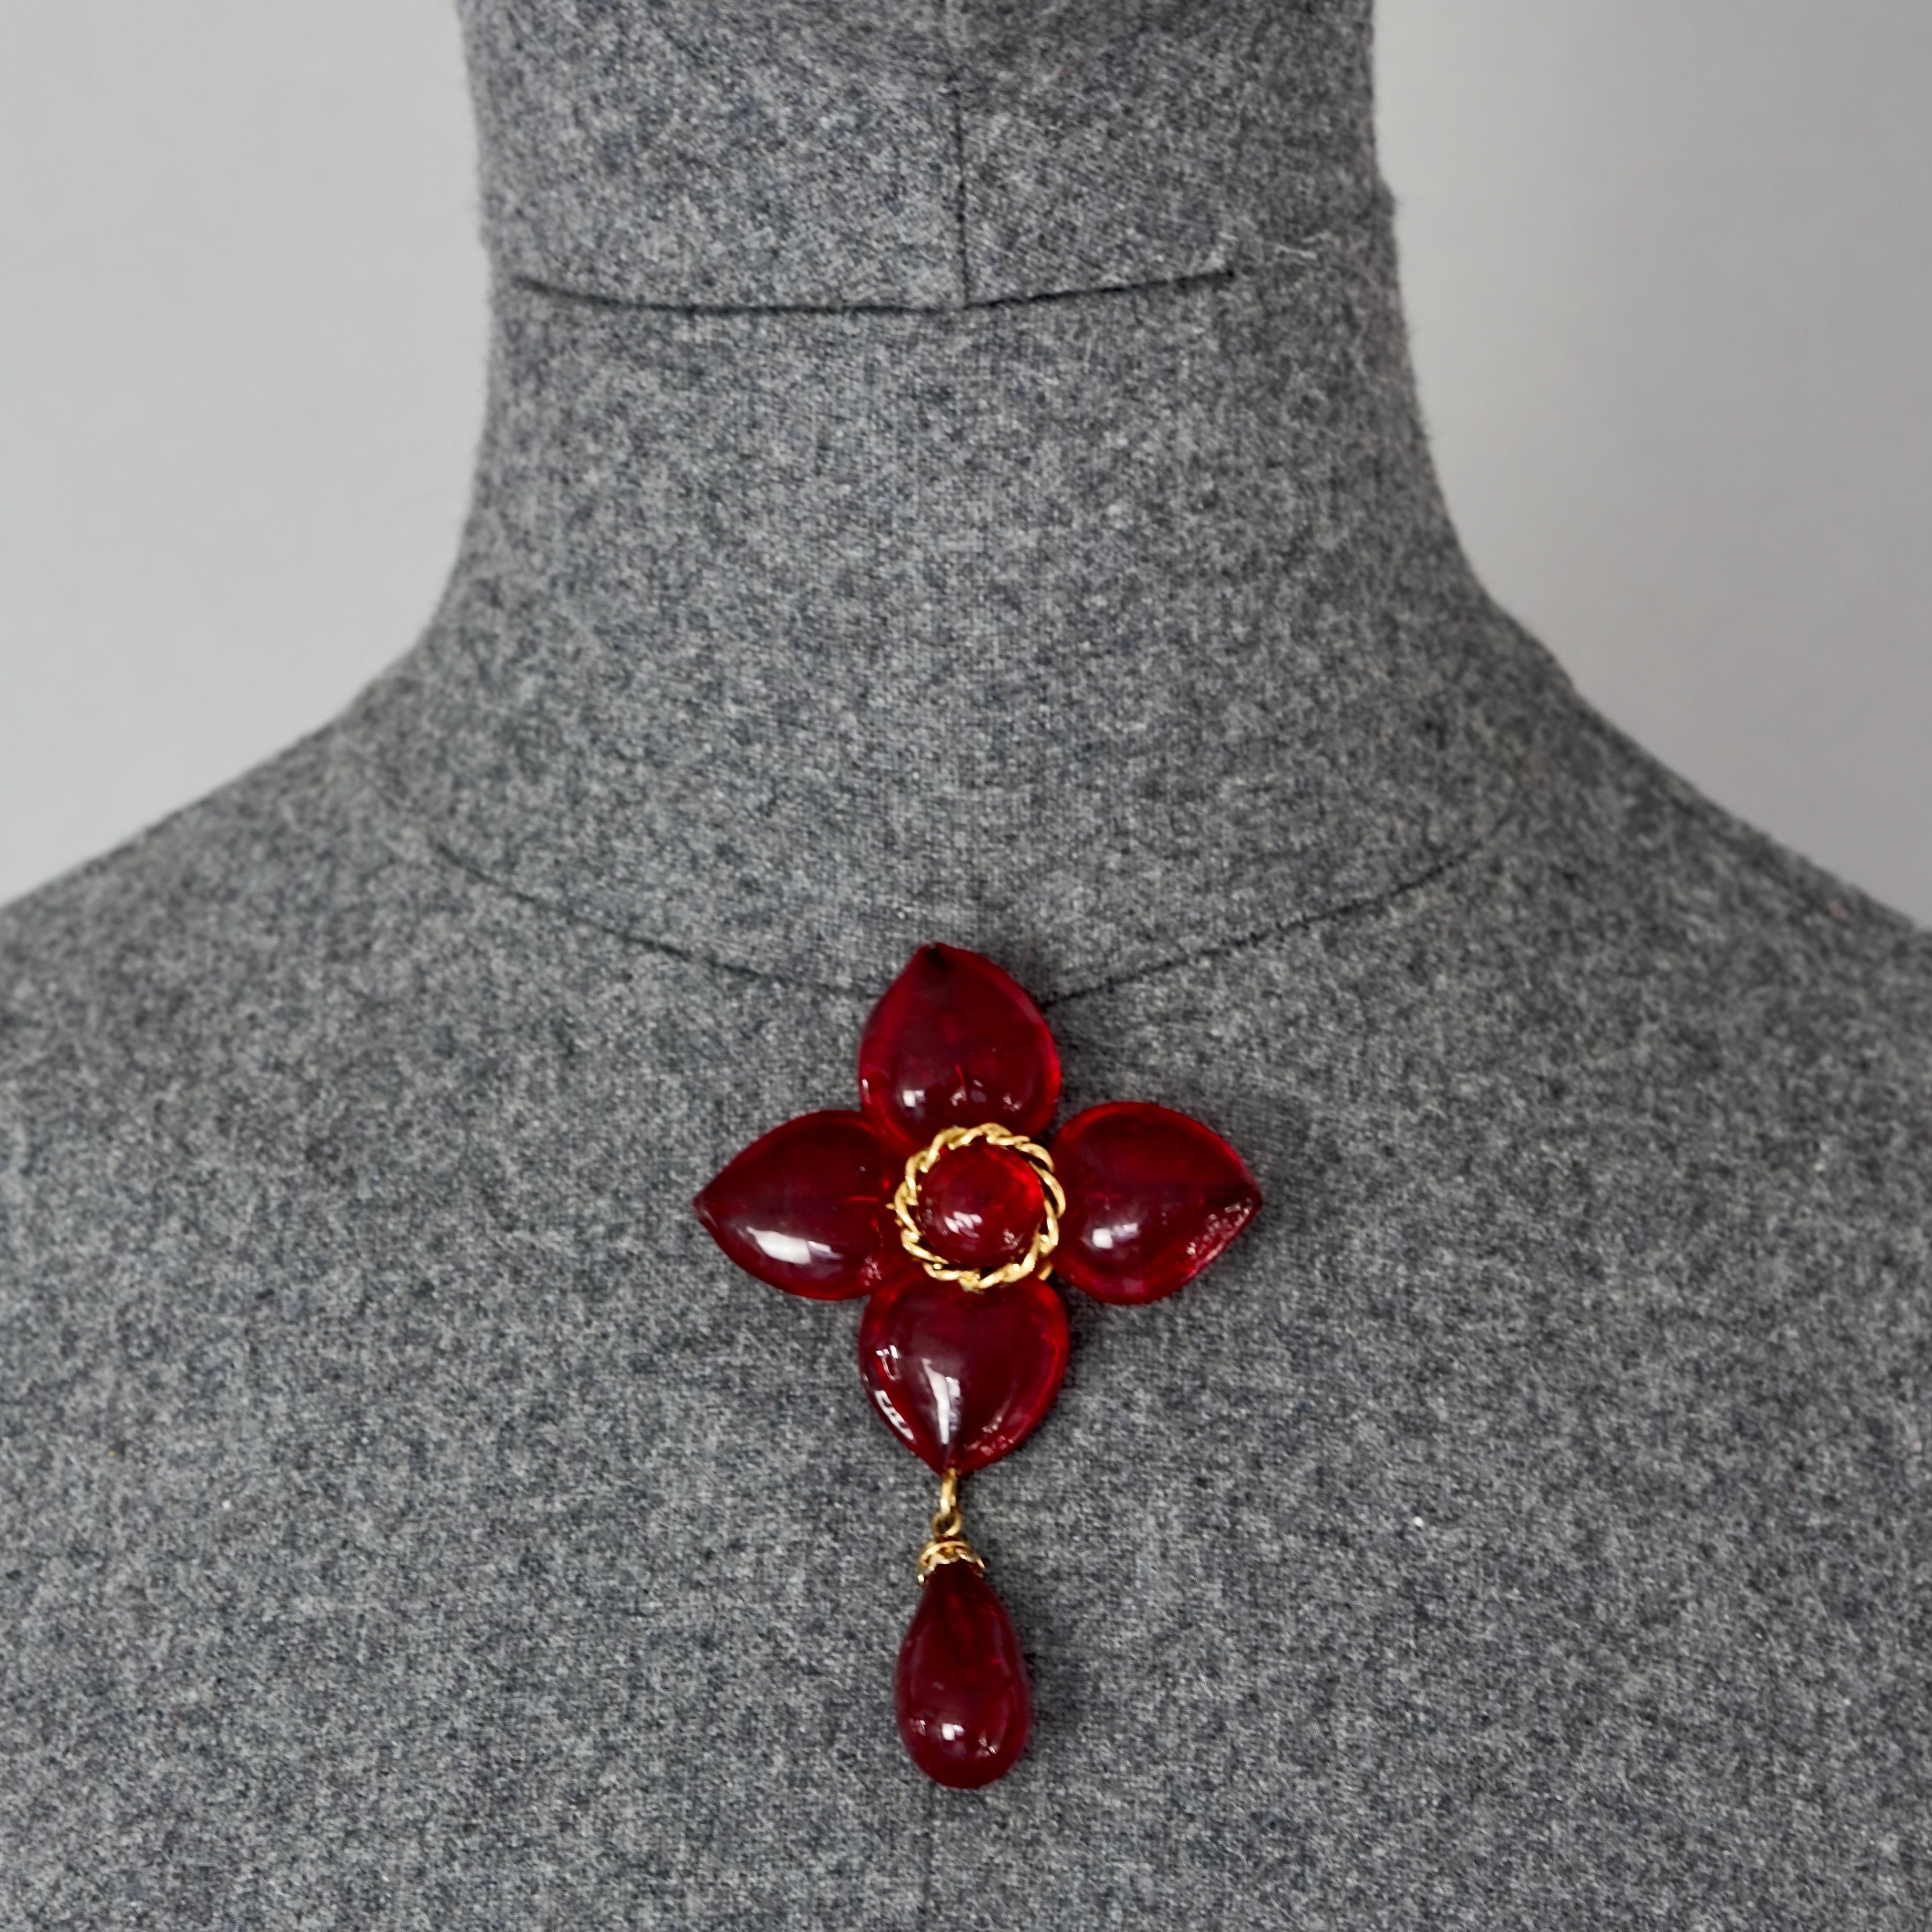 Vintage MOSCHINO Red Heart Flower Novelty Drop Brooch

Measurements: 
Height: 3.54 inches (9 cm)
Width: 2.24 inches (5.7 cm)

Features:
- 100% Authentic MOSCHINO.
- Flower drop brooch in red heart glass cabochons.
- Signed MOSCHINO.
- Gold tone